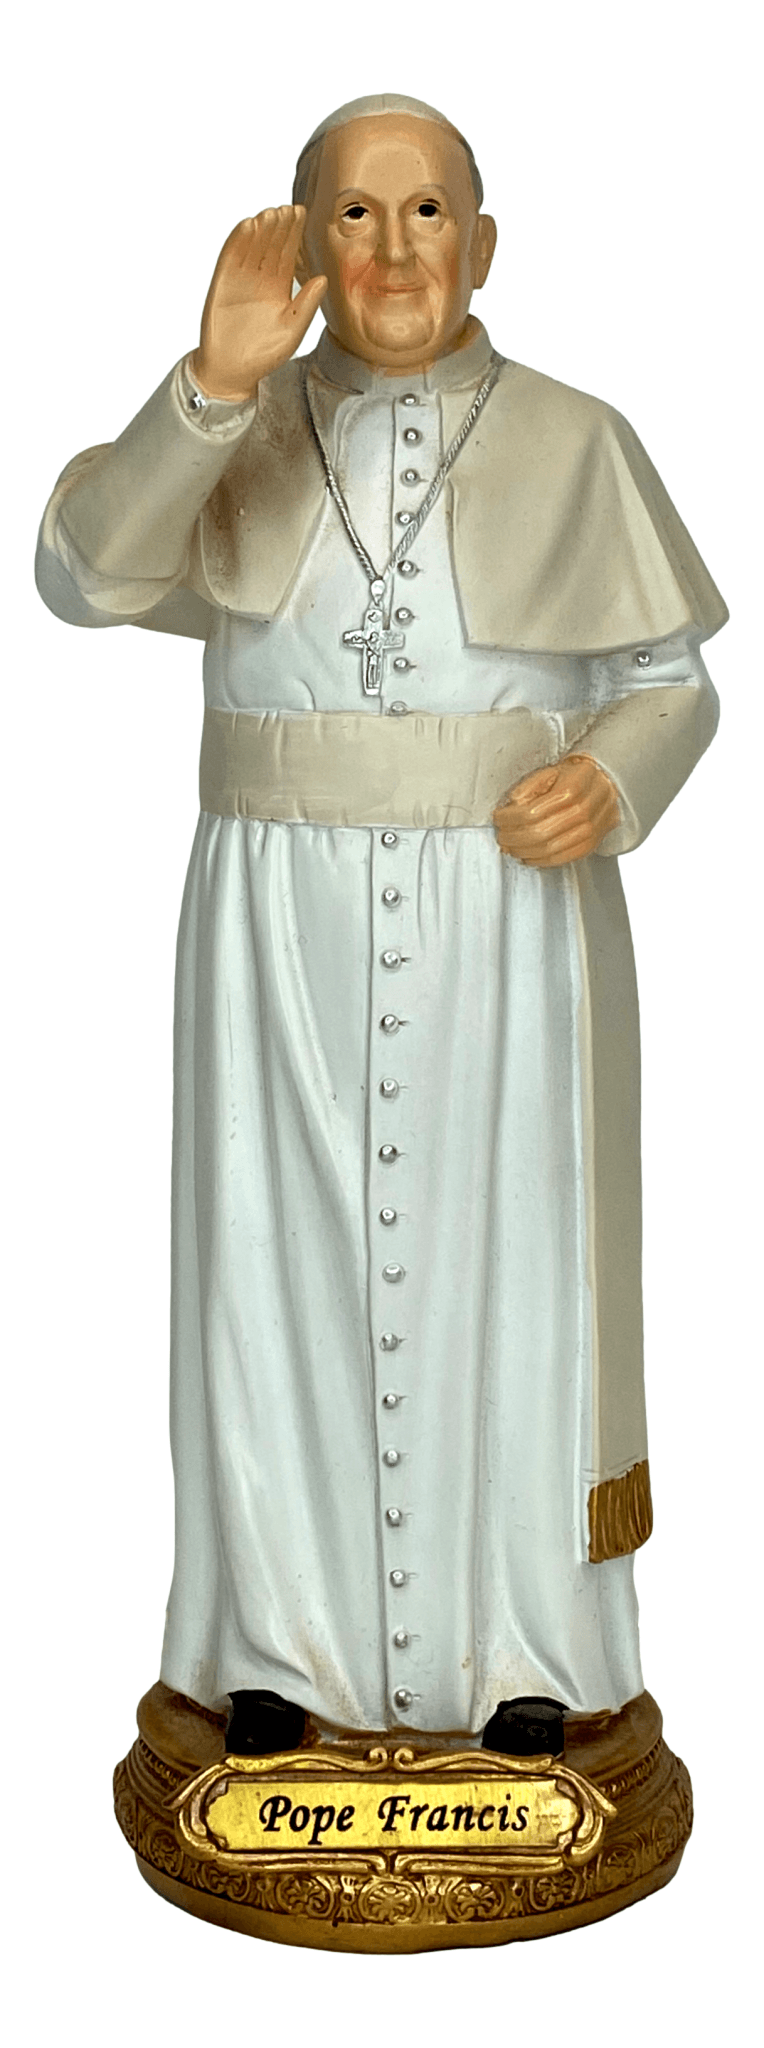 Statue Resin Pope Francis Name Plaque 2 3/4 W x 8 H Inches - Ysleta Mission Gift Shop- VOTED El Paso's Best Gift Shop